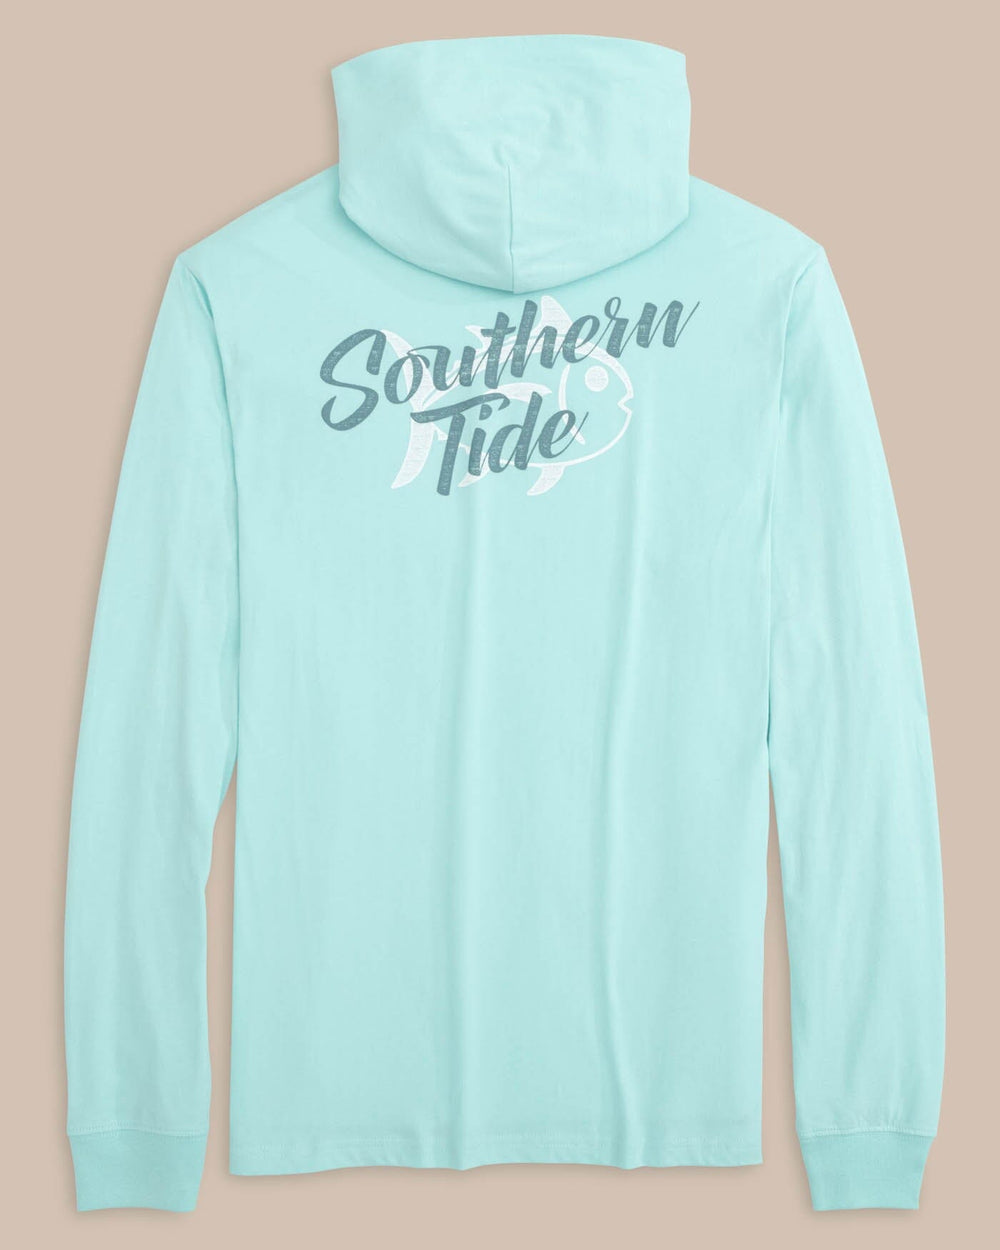 The back view of the Southern Tide Letterpress Skipjack Long Sleeve Hoodie T-Shirt by Southern Tide - Wake Blue